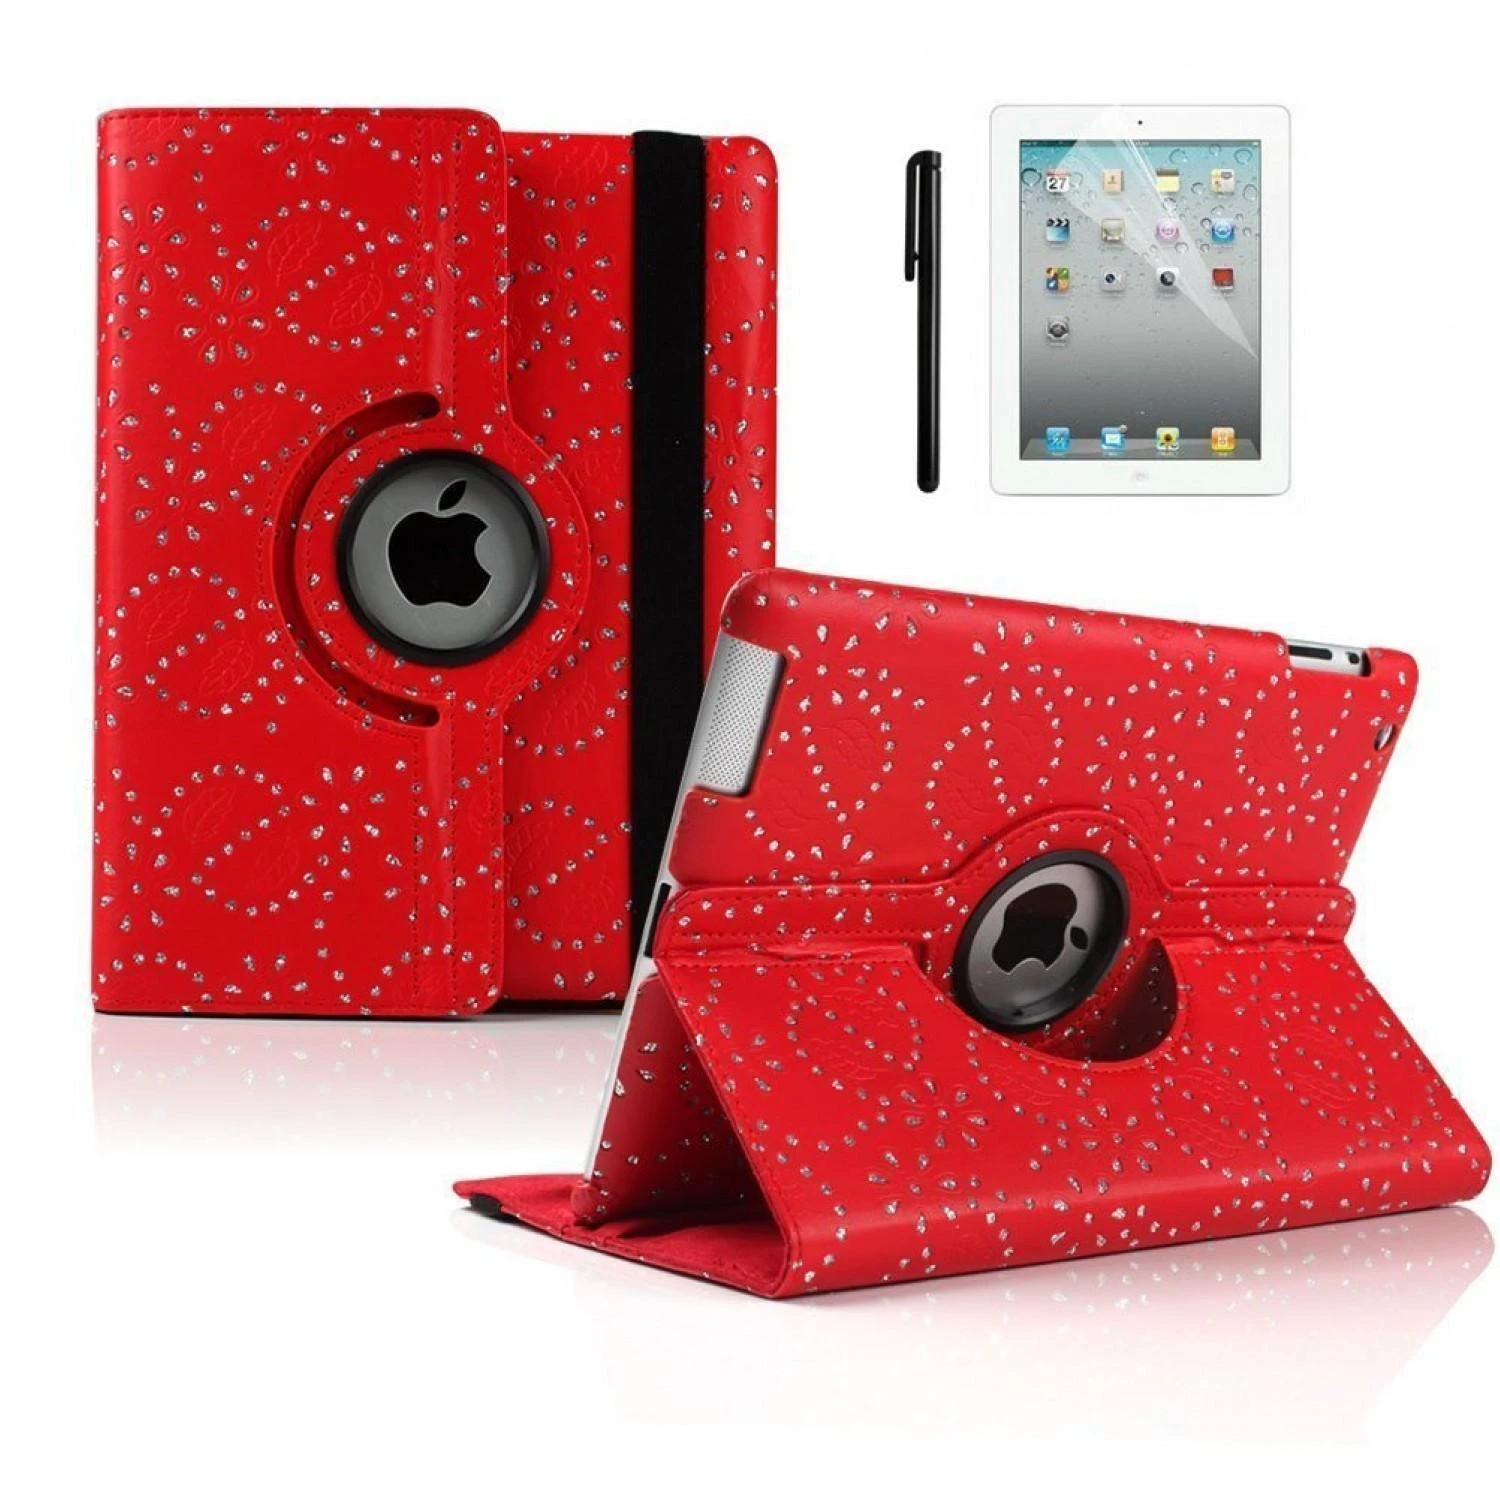 SAMSUNG TAB A T550 9.7 INCH GLITTER ROTATING CASE RED